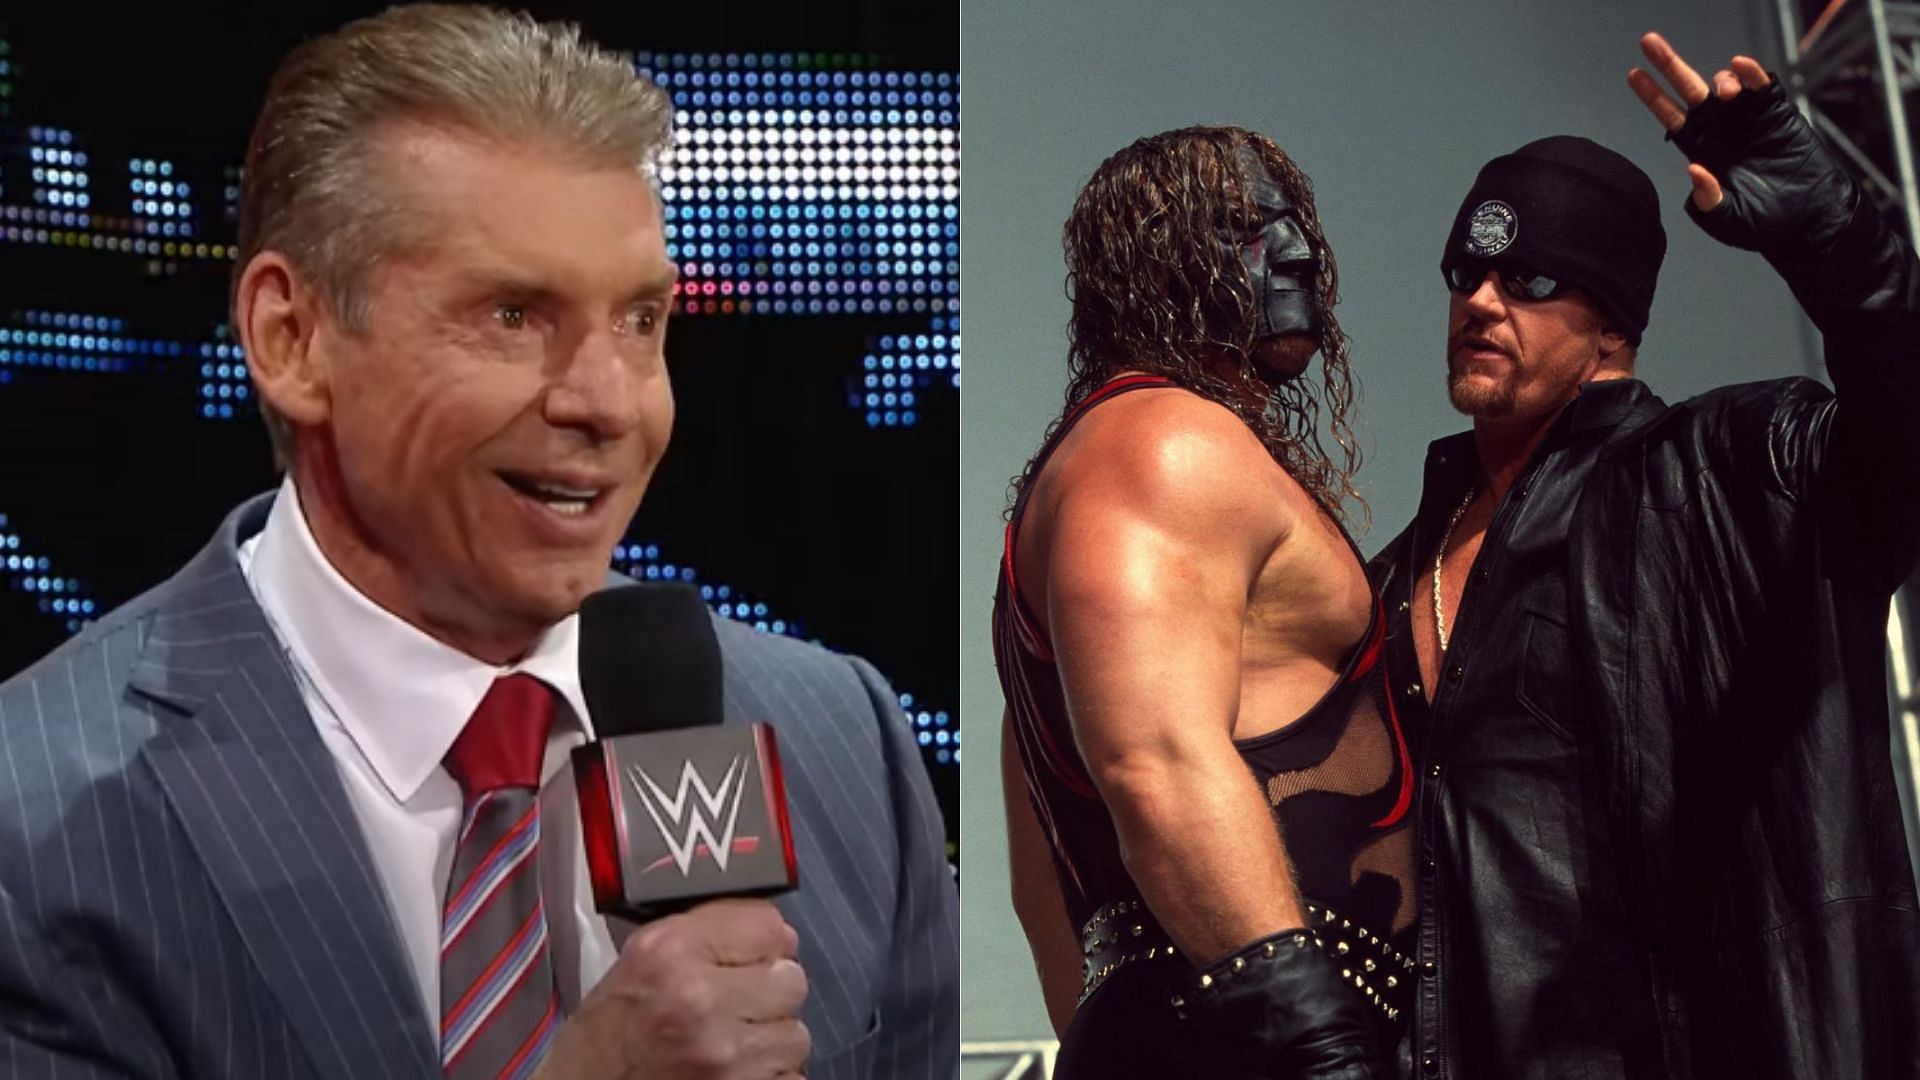 Vince McMahon (left); Kane and The Undertaker (right)